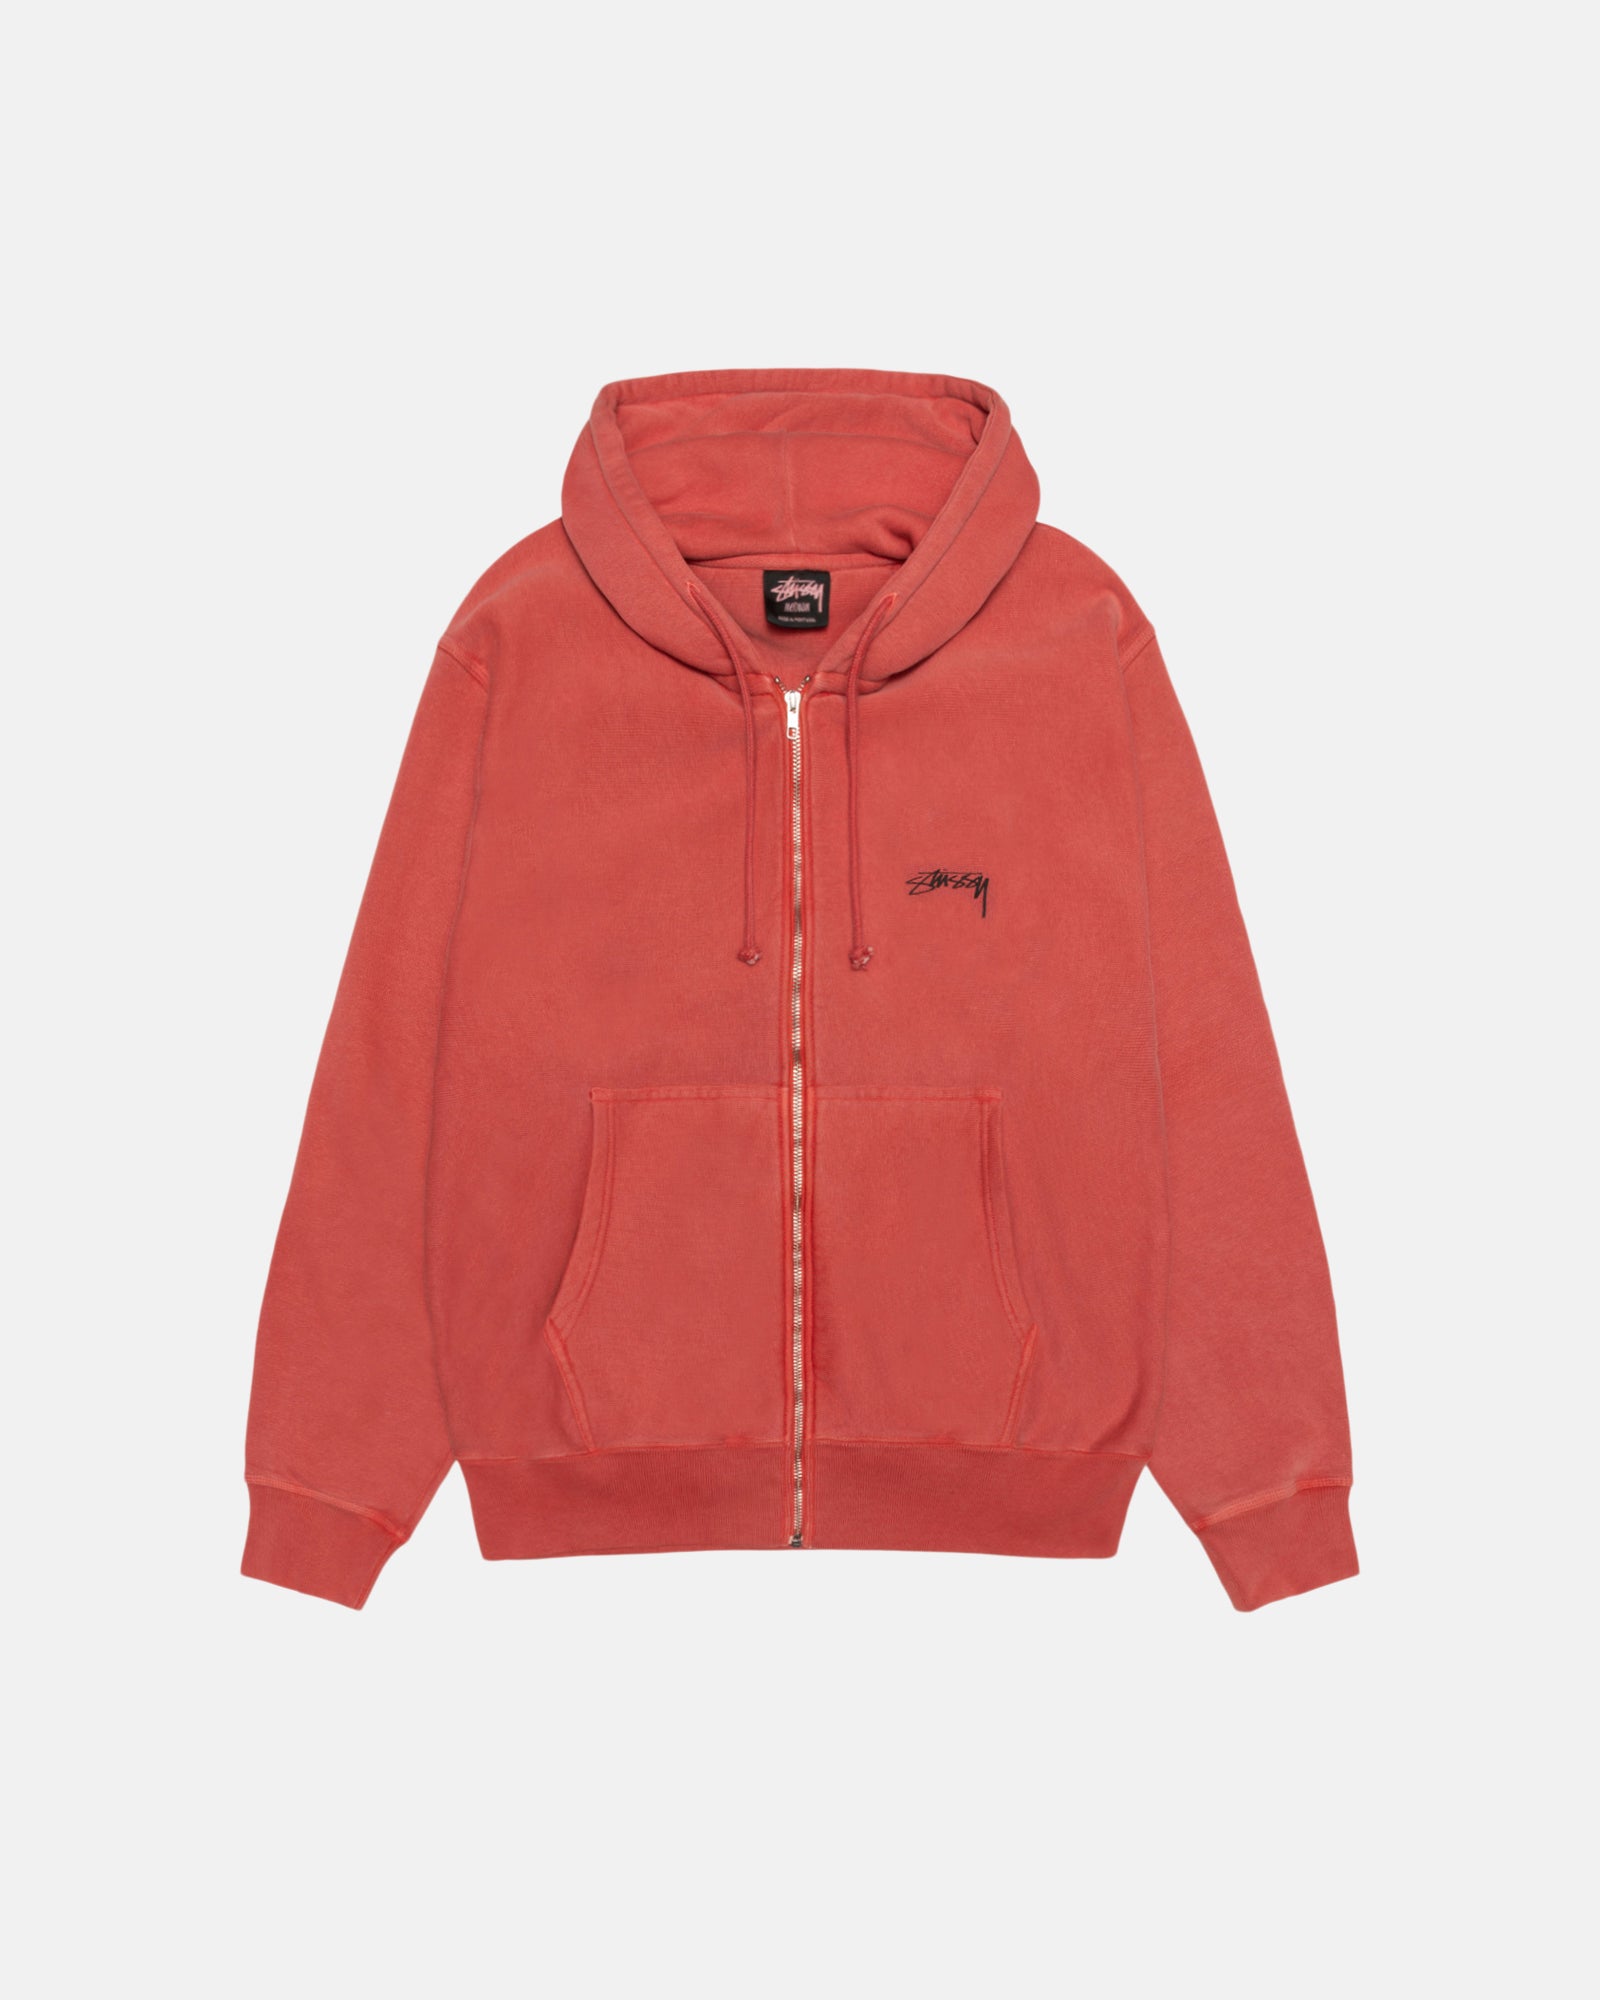 Stüssy Smooth Stock Zip Hoodie Pigment Dyed Guava Sweats